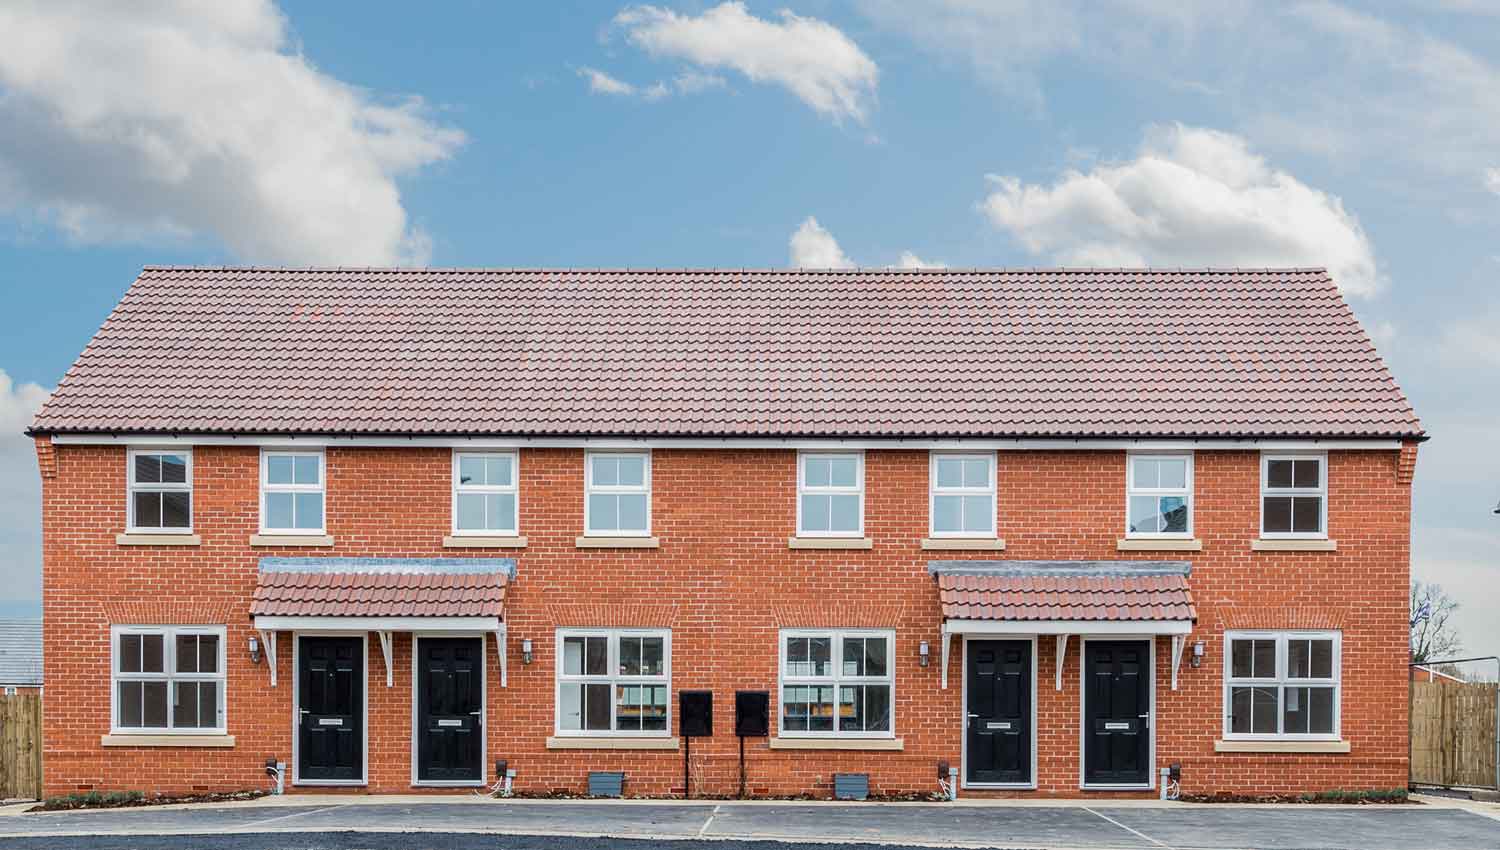 Harrogate Borough Council has 40 homes across the district to offer to first time buyers as part of its Shared Ownership scheme.